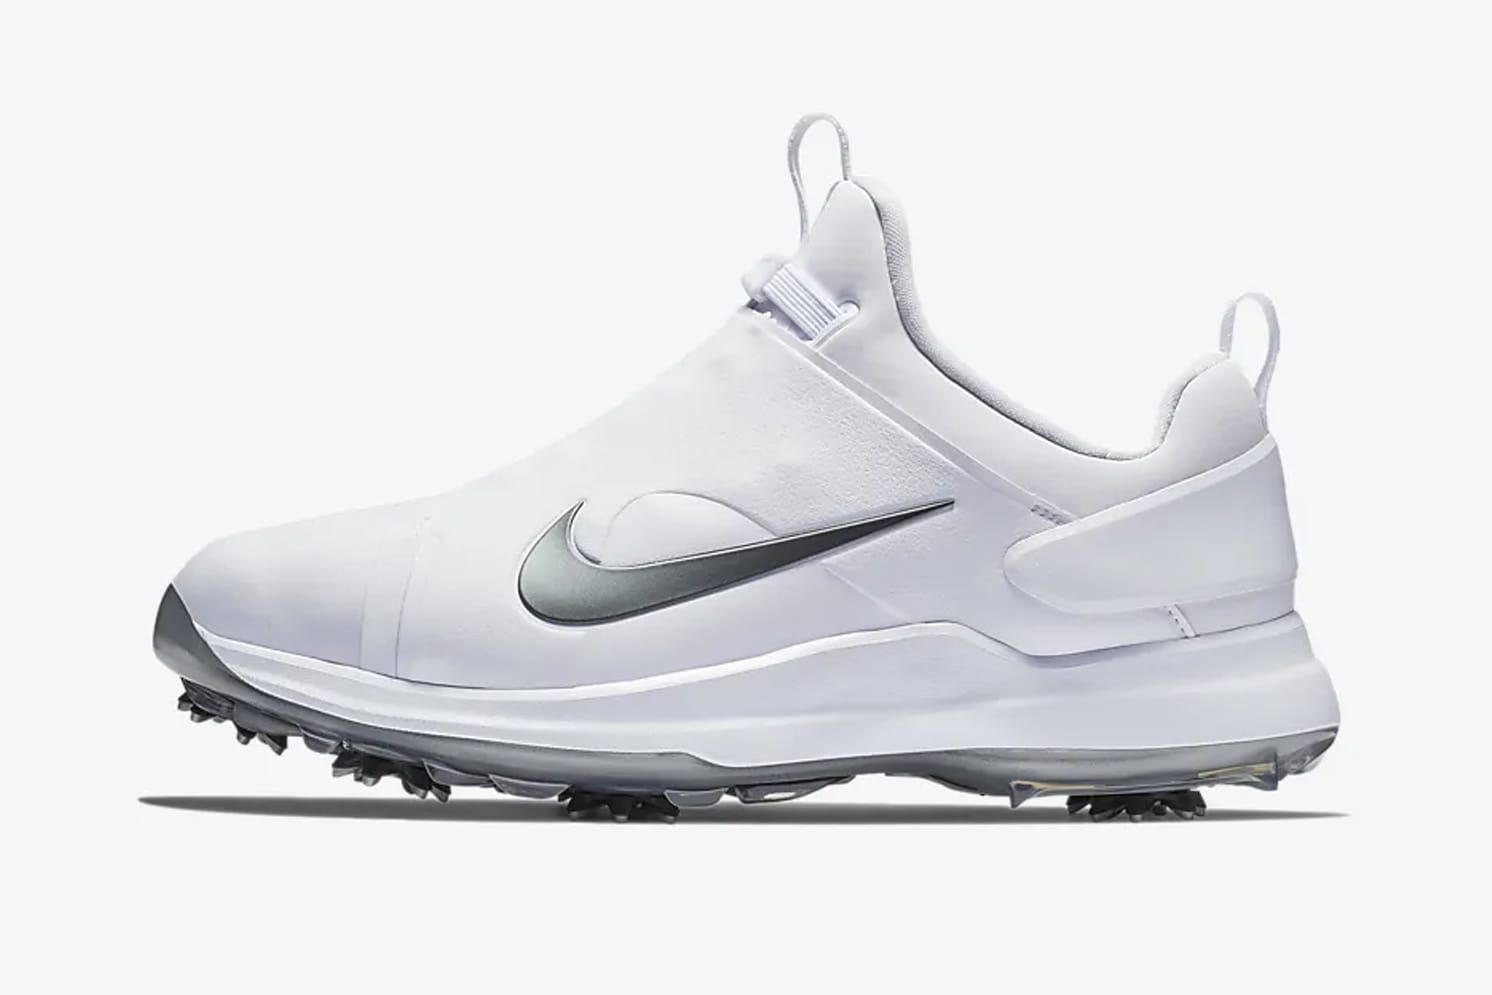 nike tiger woods golf shoes 2019